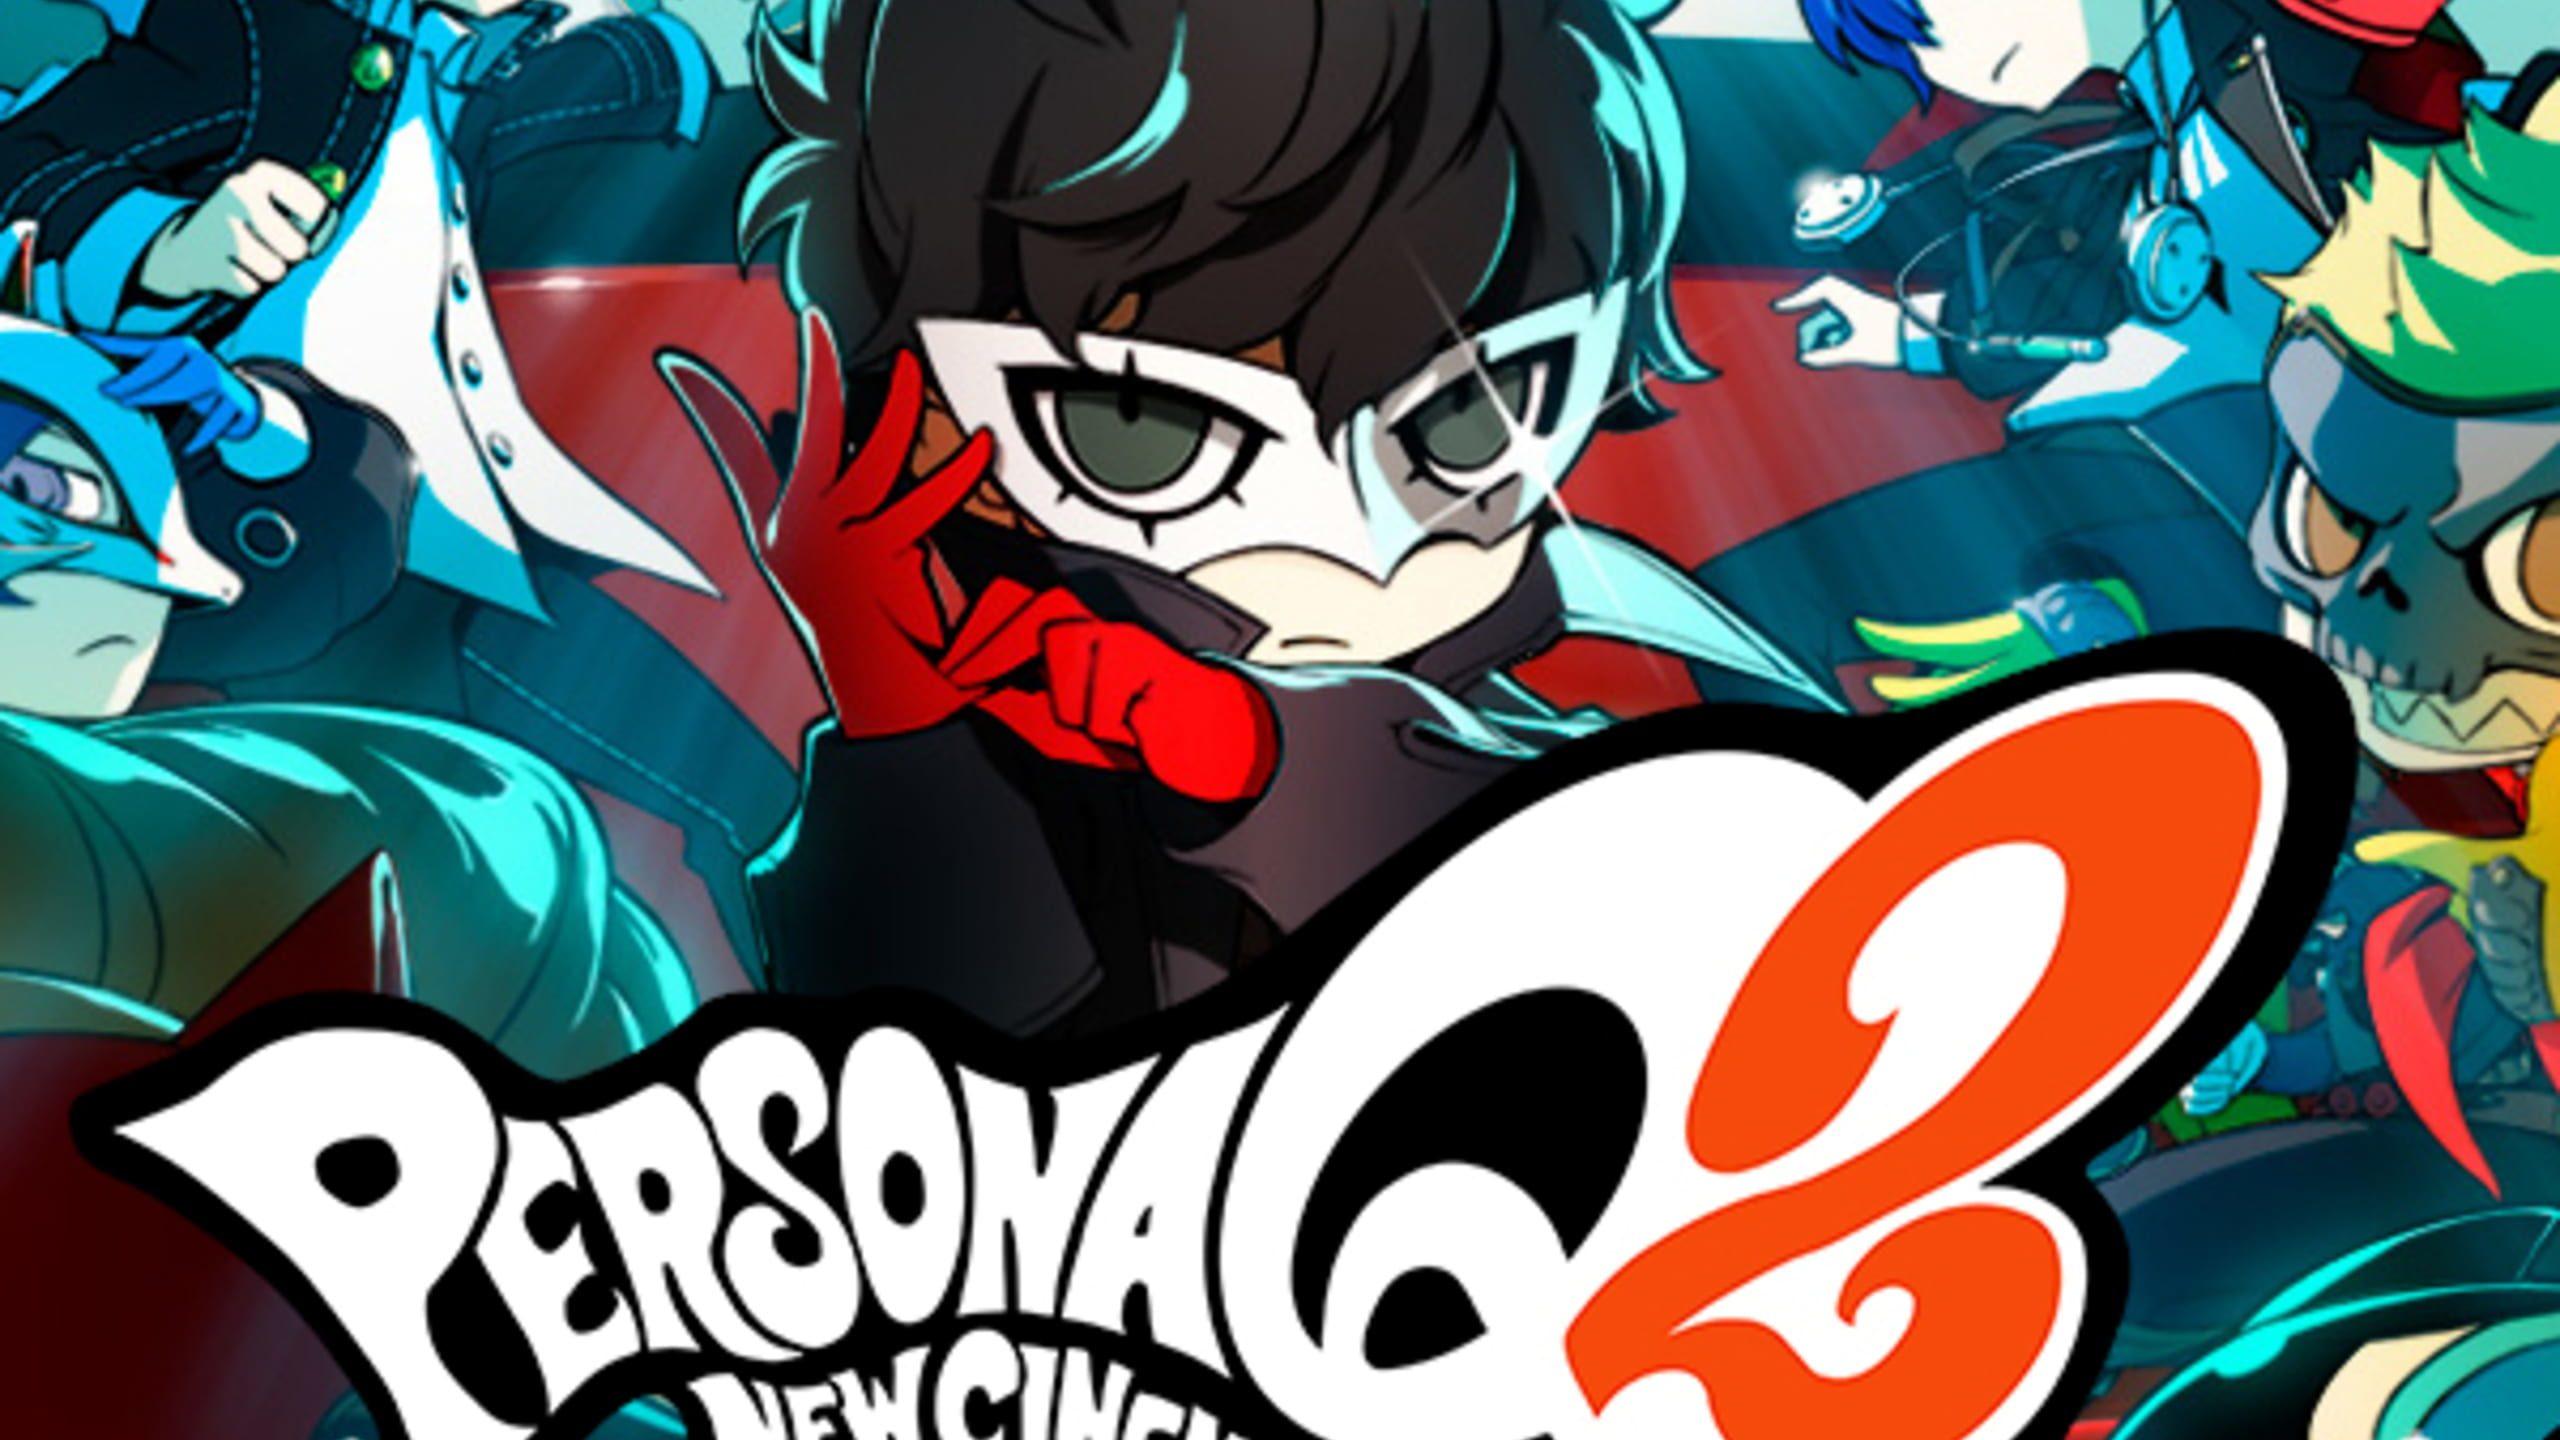 Persona Q2: New Cinema Labyrinth Release Date & Trailers